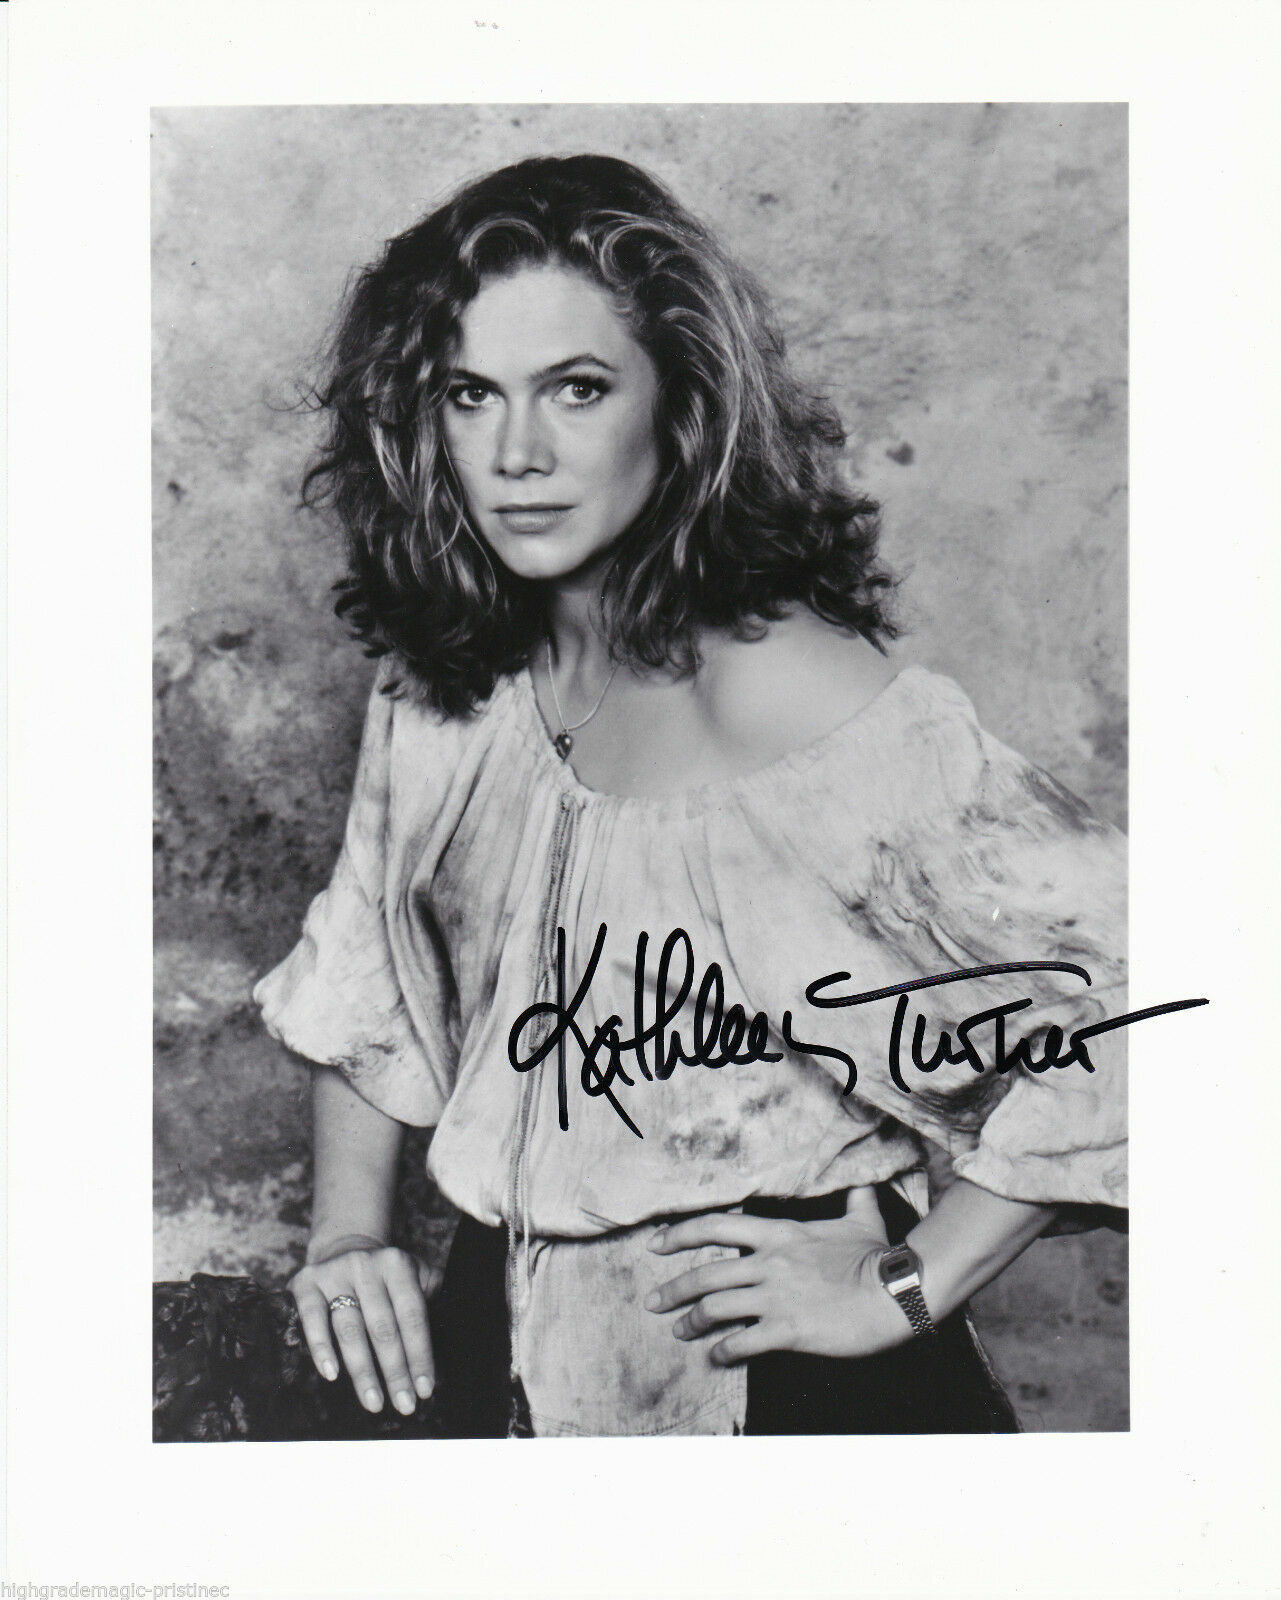 KATHLEEN TURNER AUTOGRAPHED SIGNED 8X10 IN THE FILM ROMANCING THE STONE (1984)